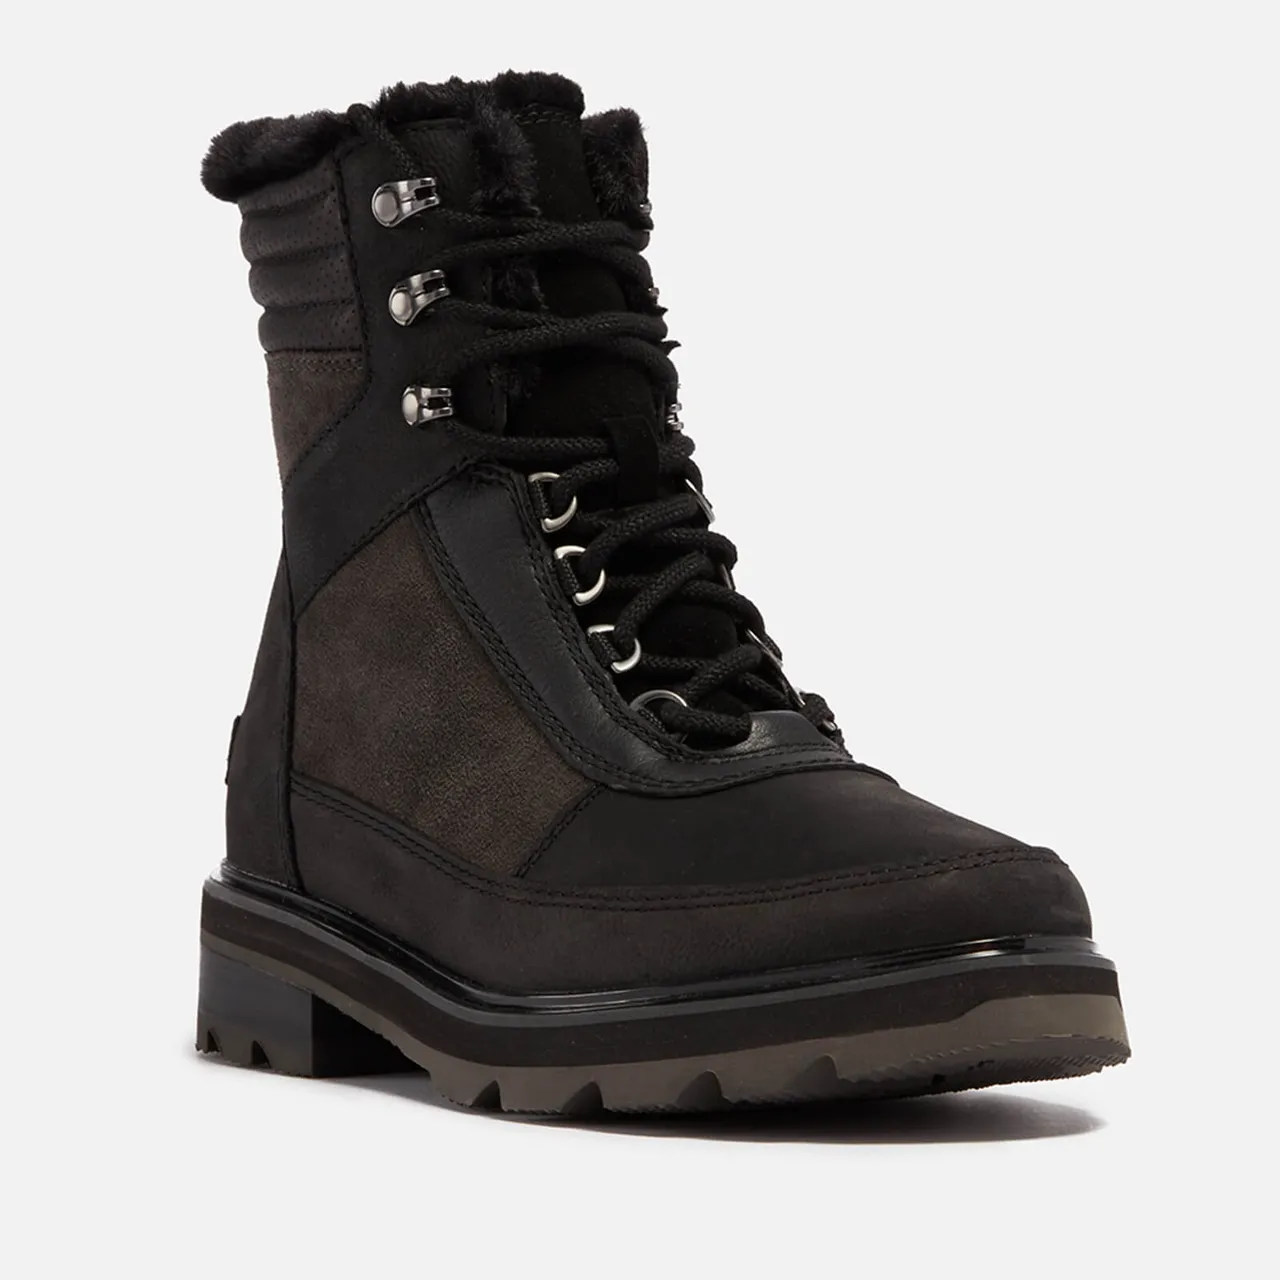 Sorel Lennox Waterproof Leather and Suede Boots